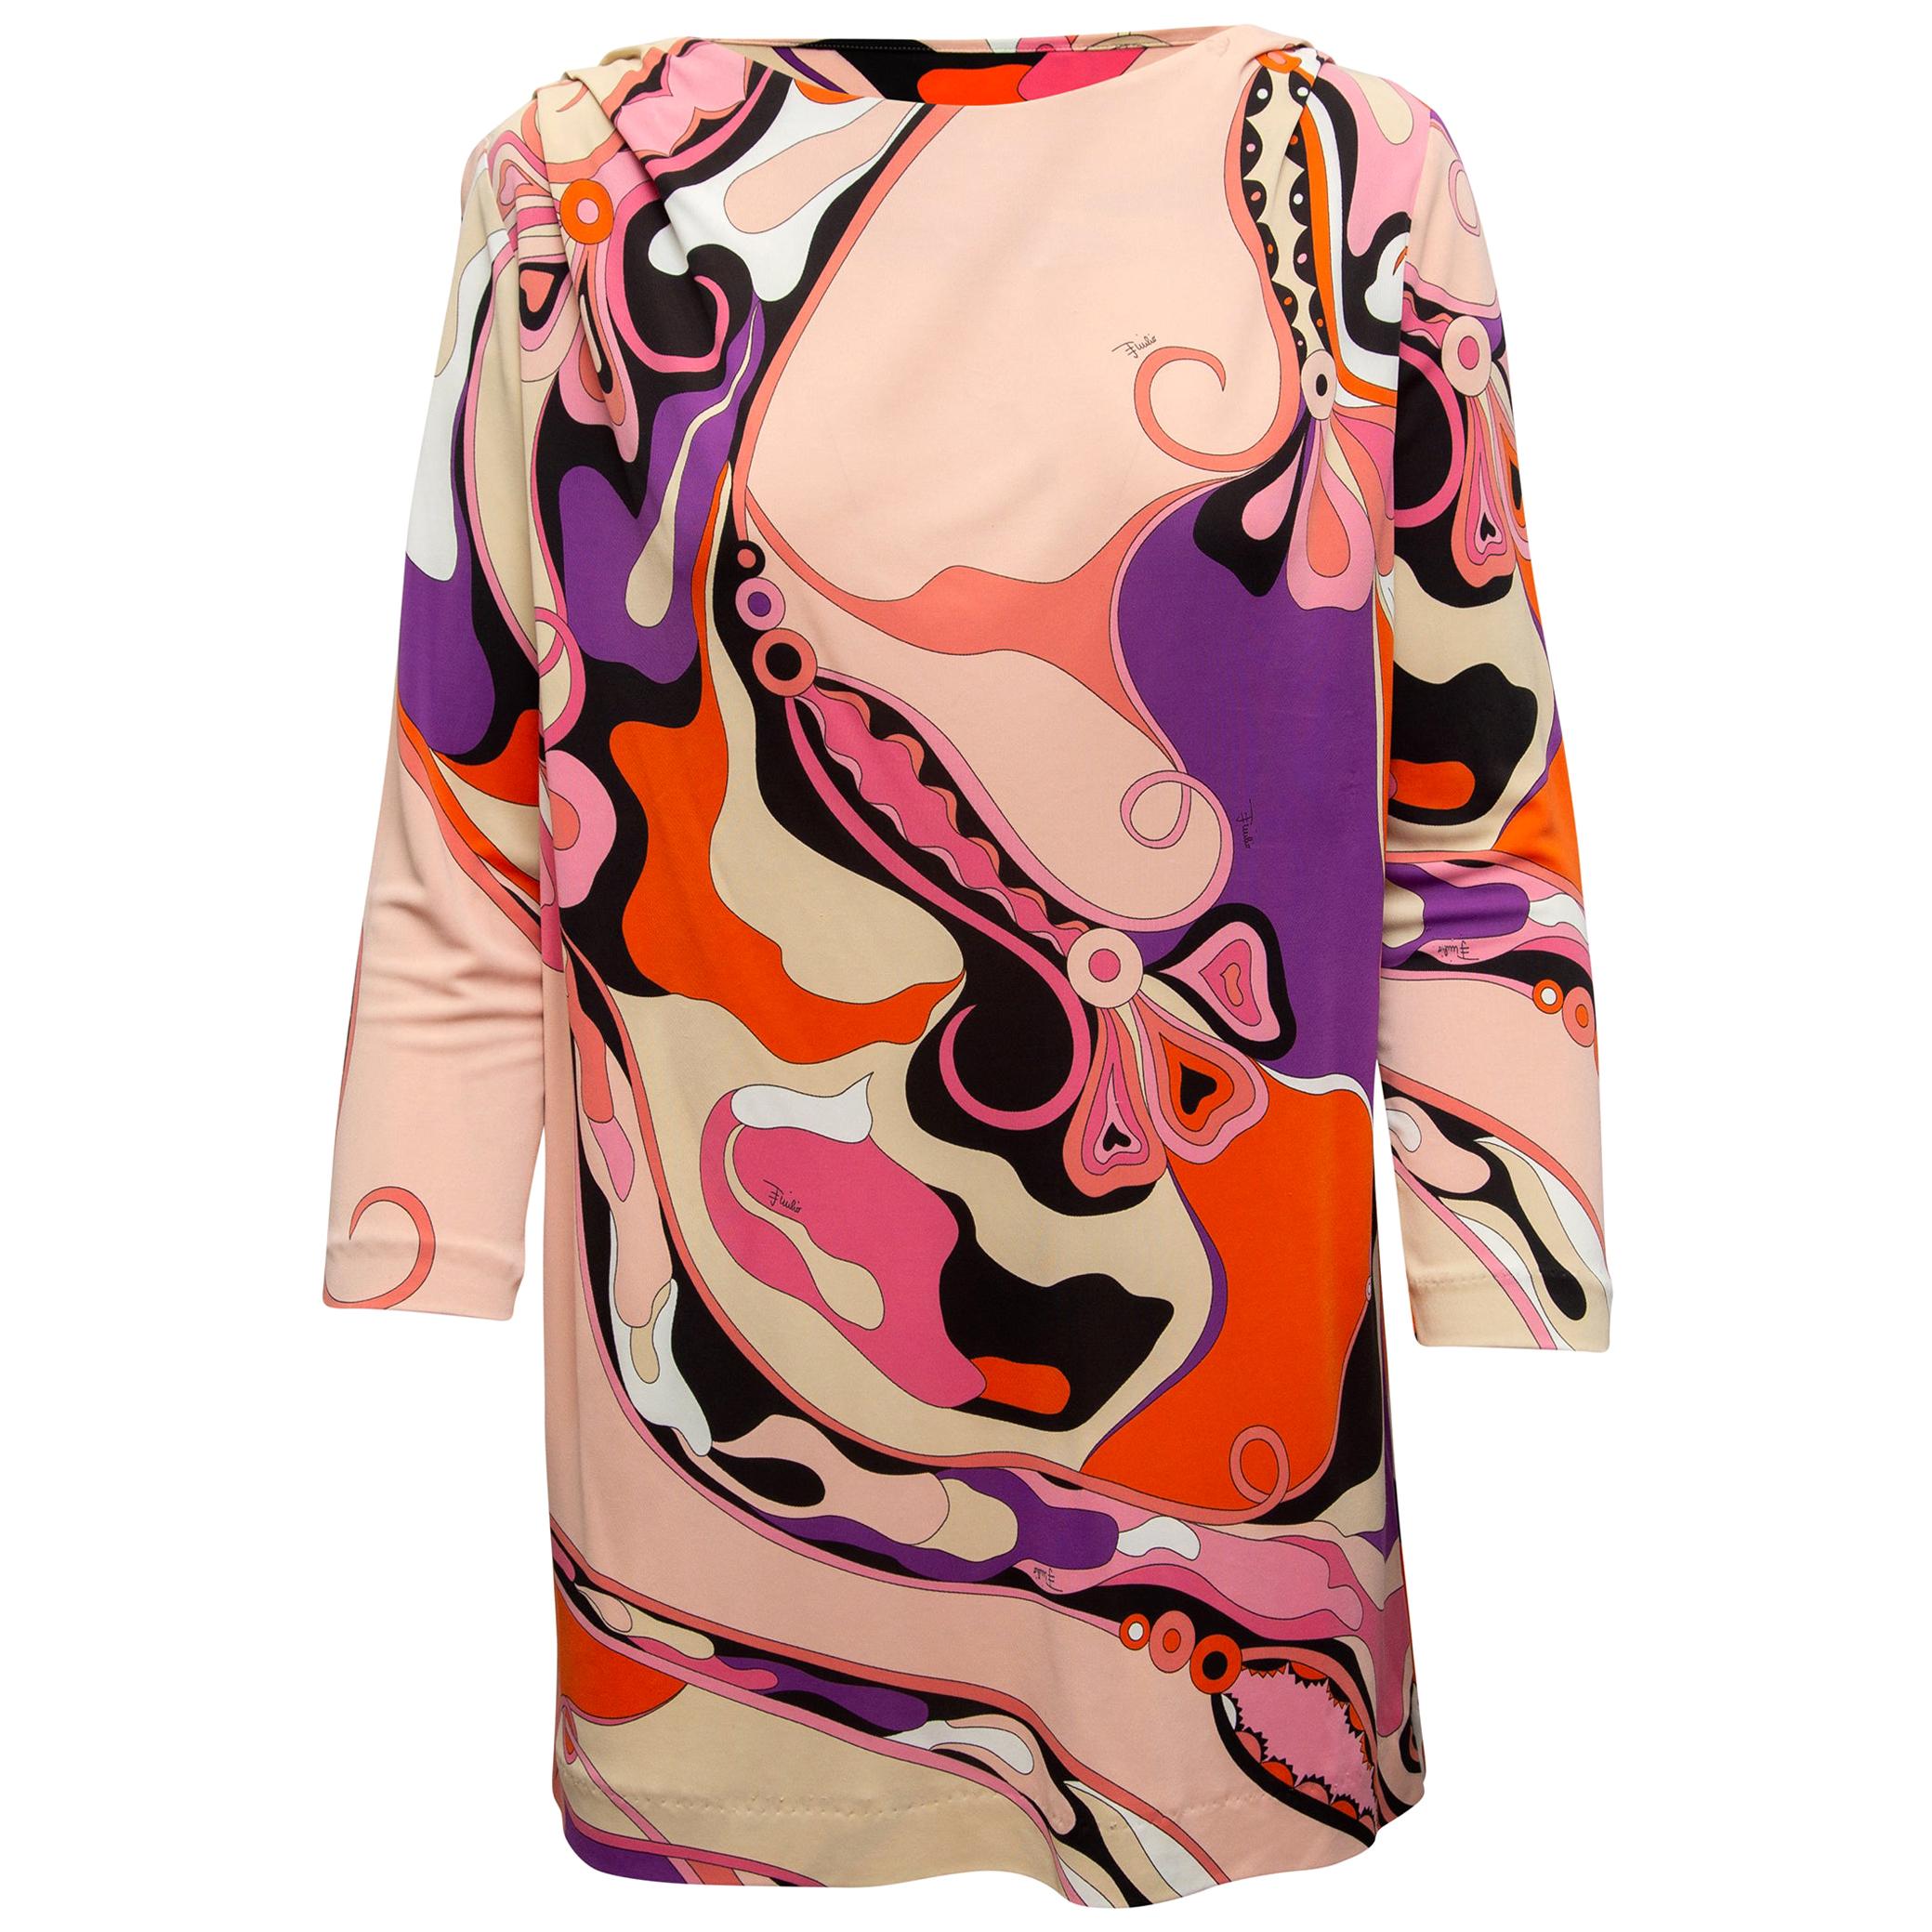  Emilio Pucci Light Pink & Multicolor Abstract Print Dress